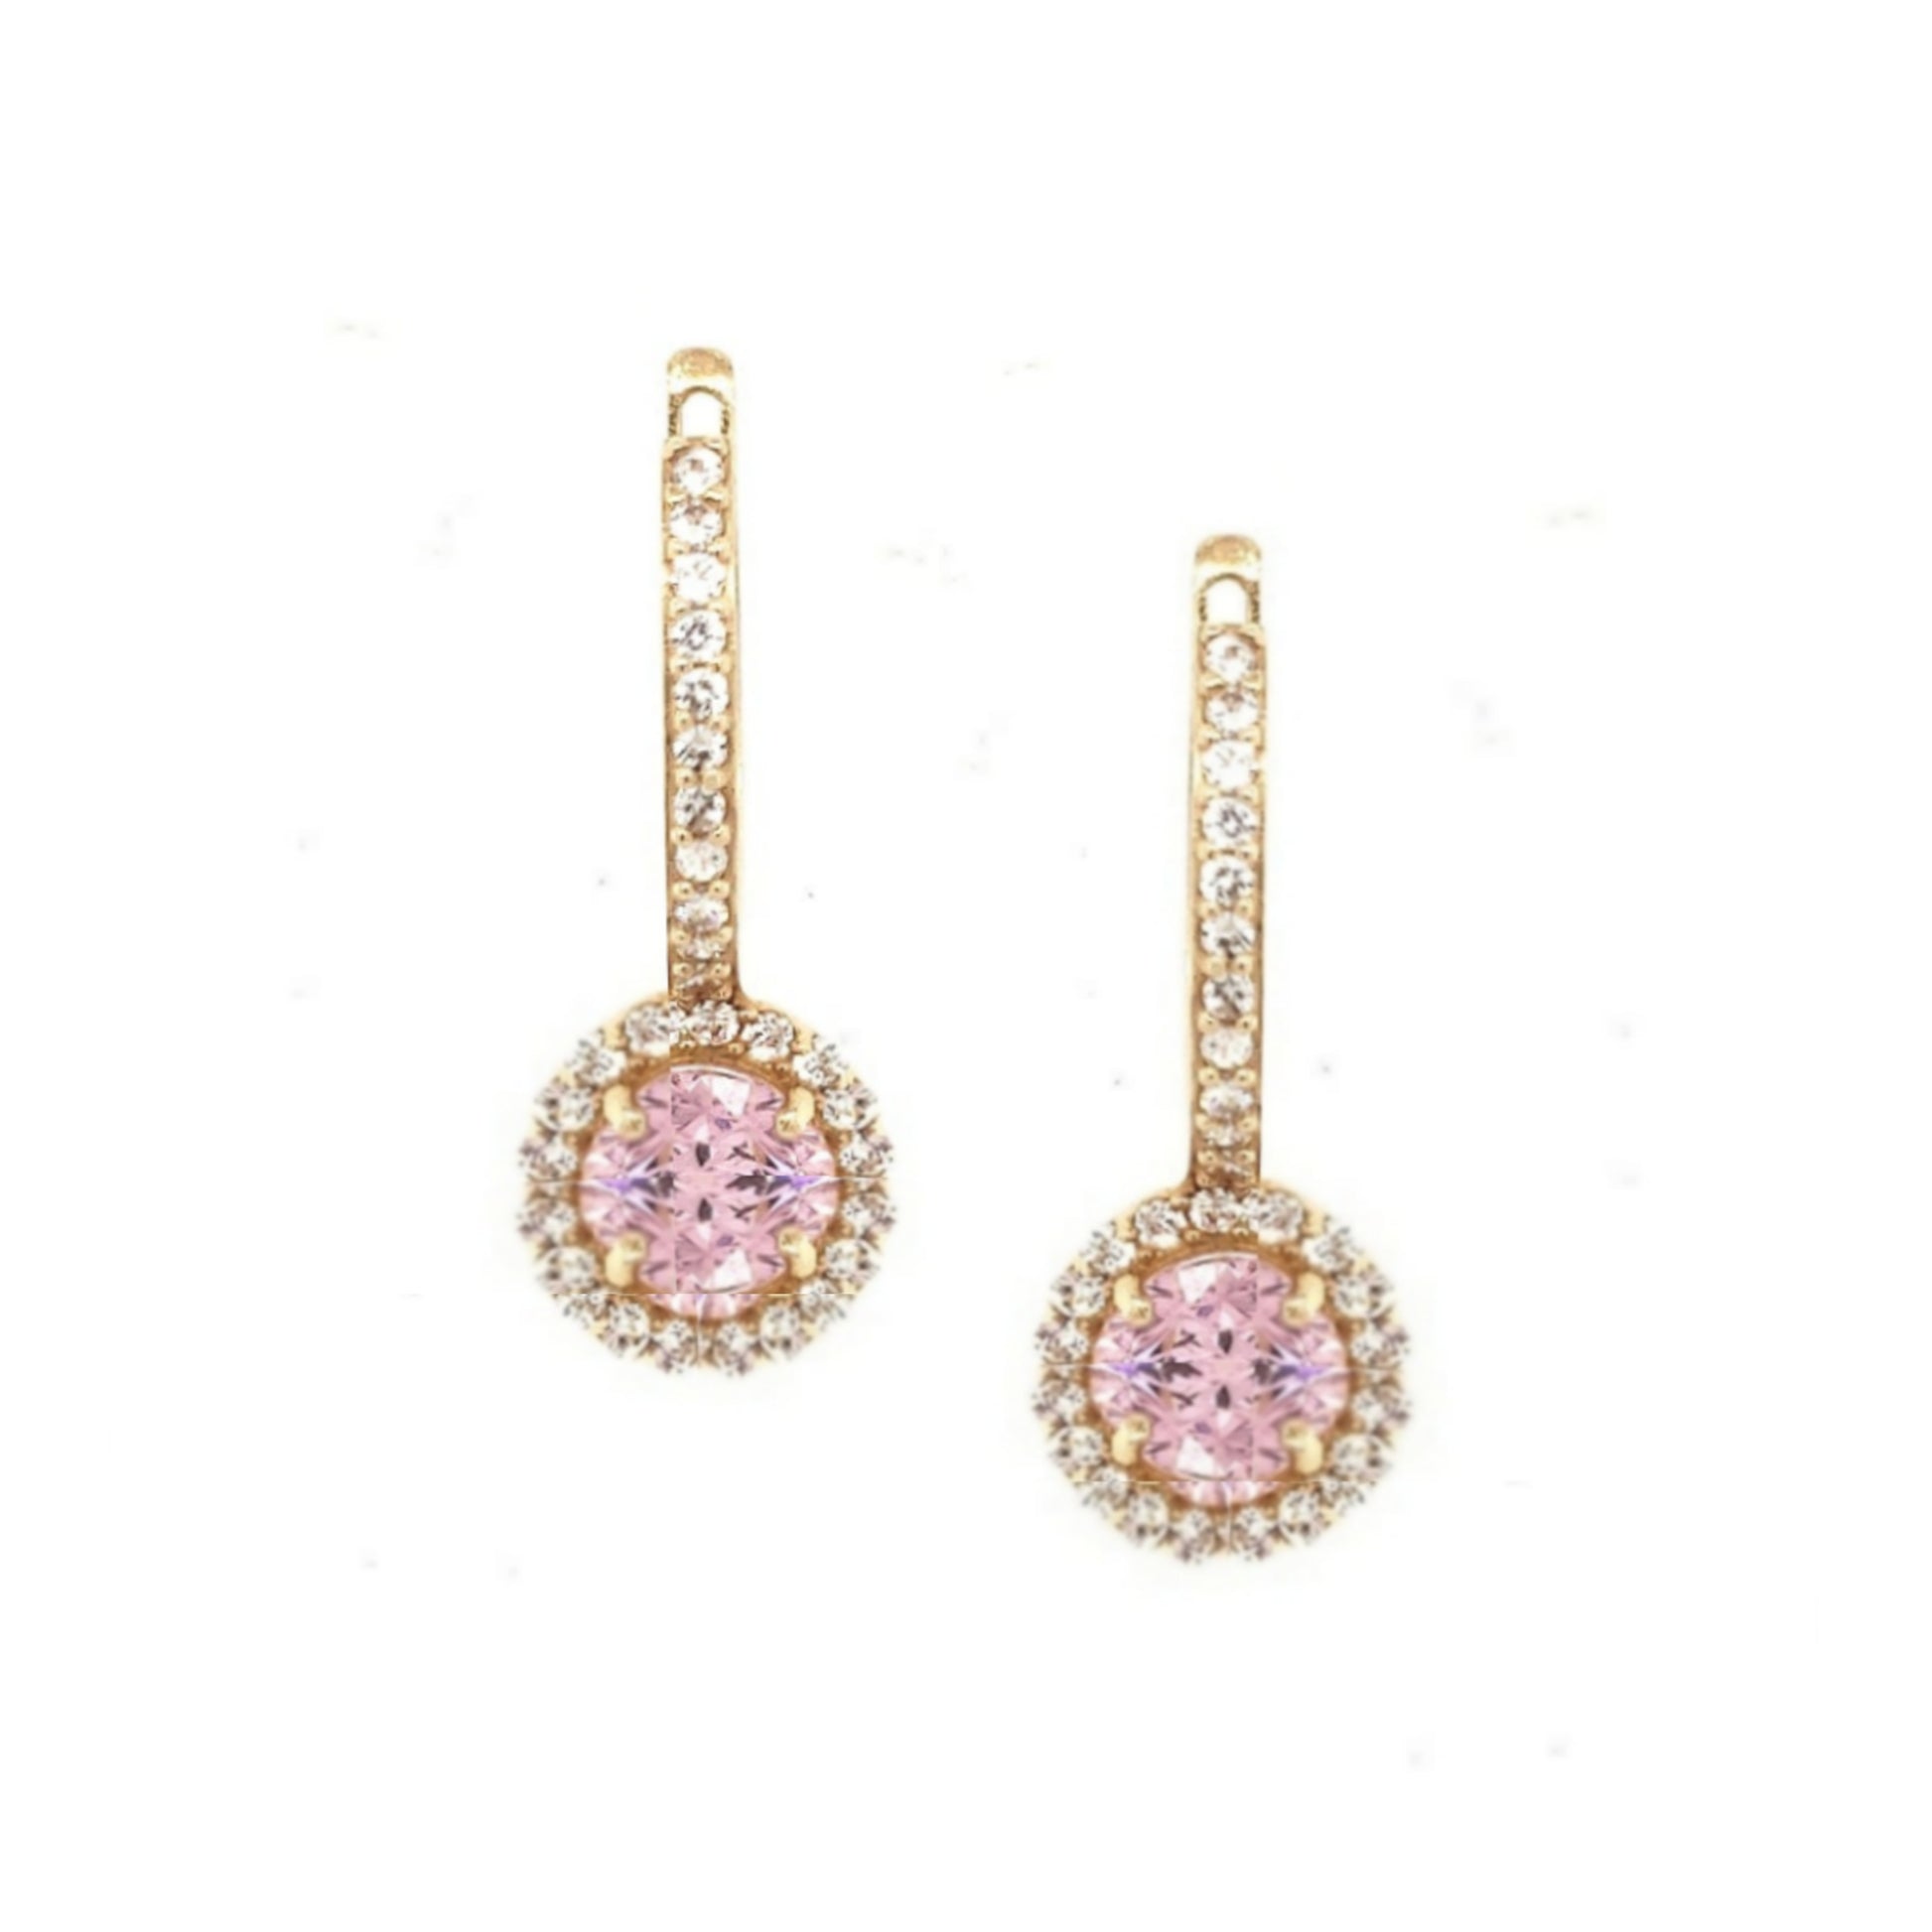 14K Gold And CZ Hoop Earring With Pink Stone - HK Jewels